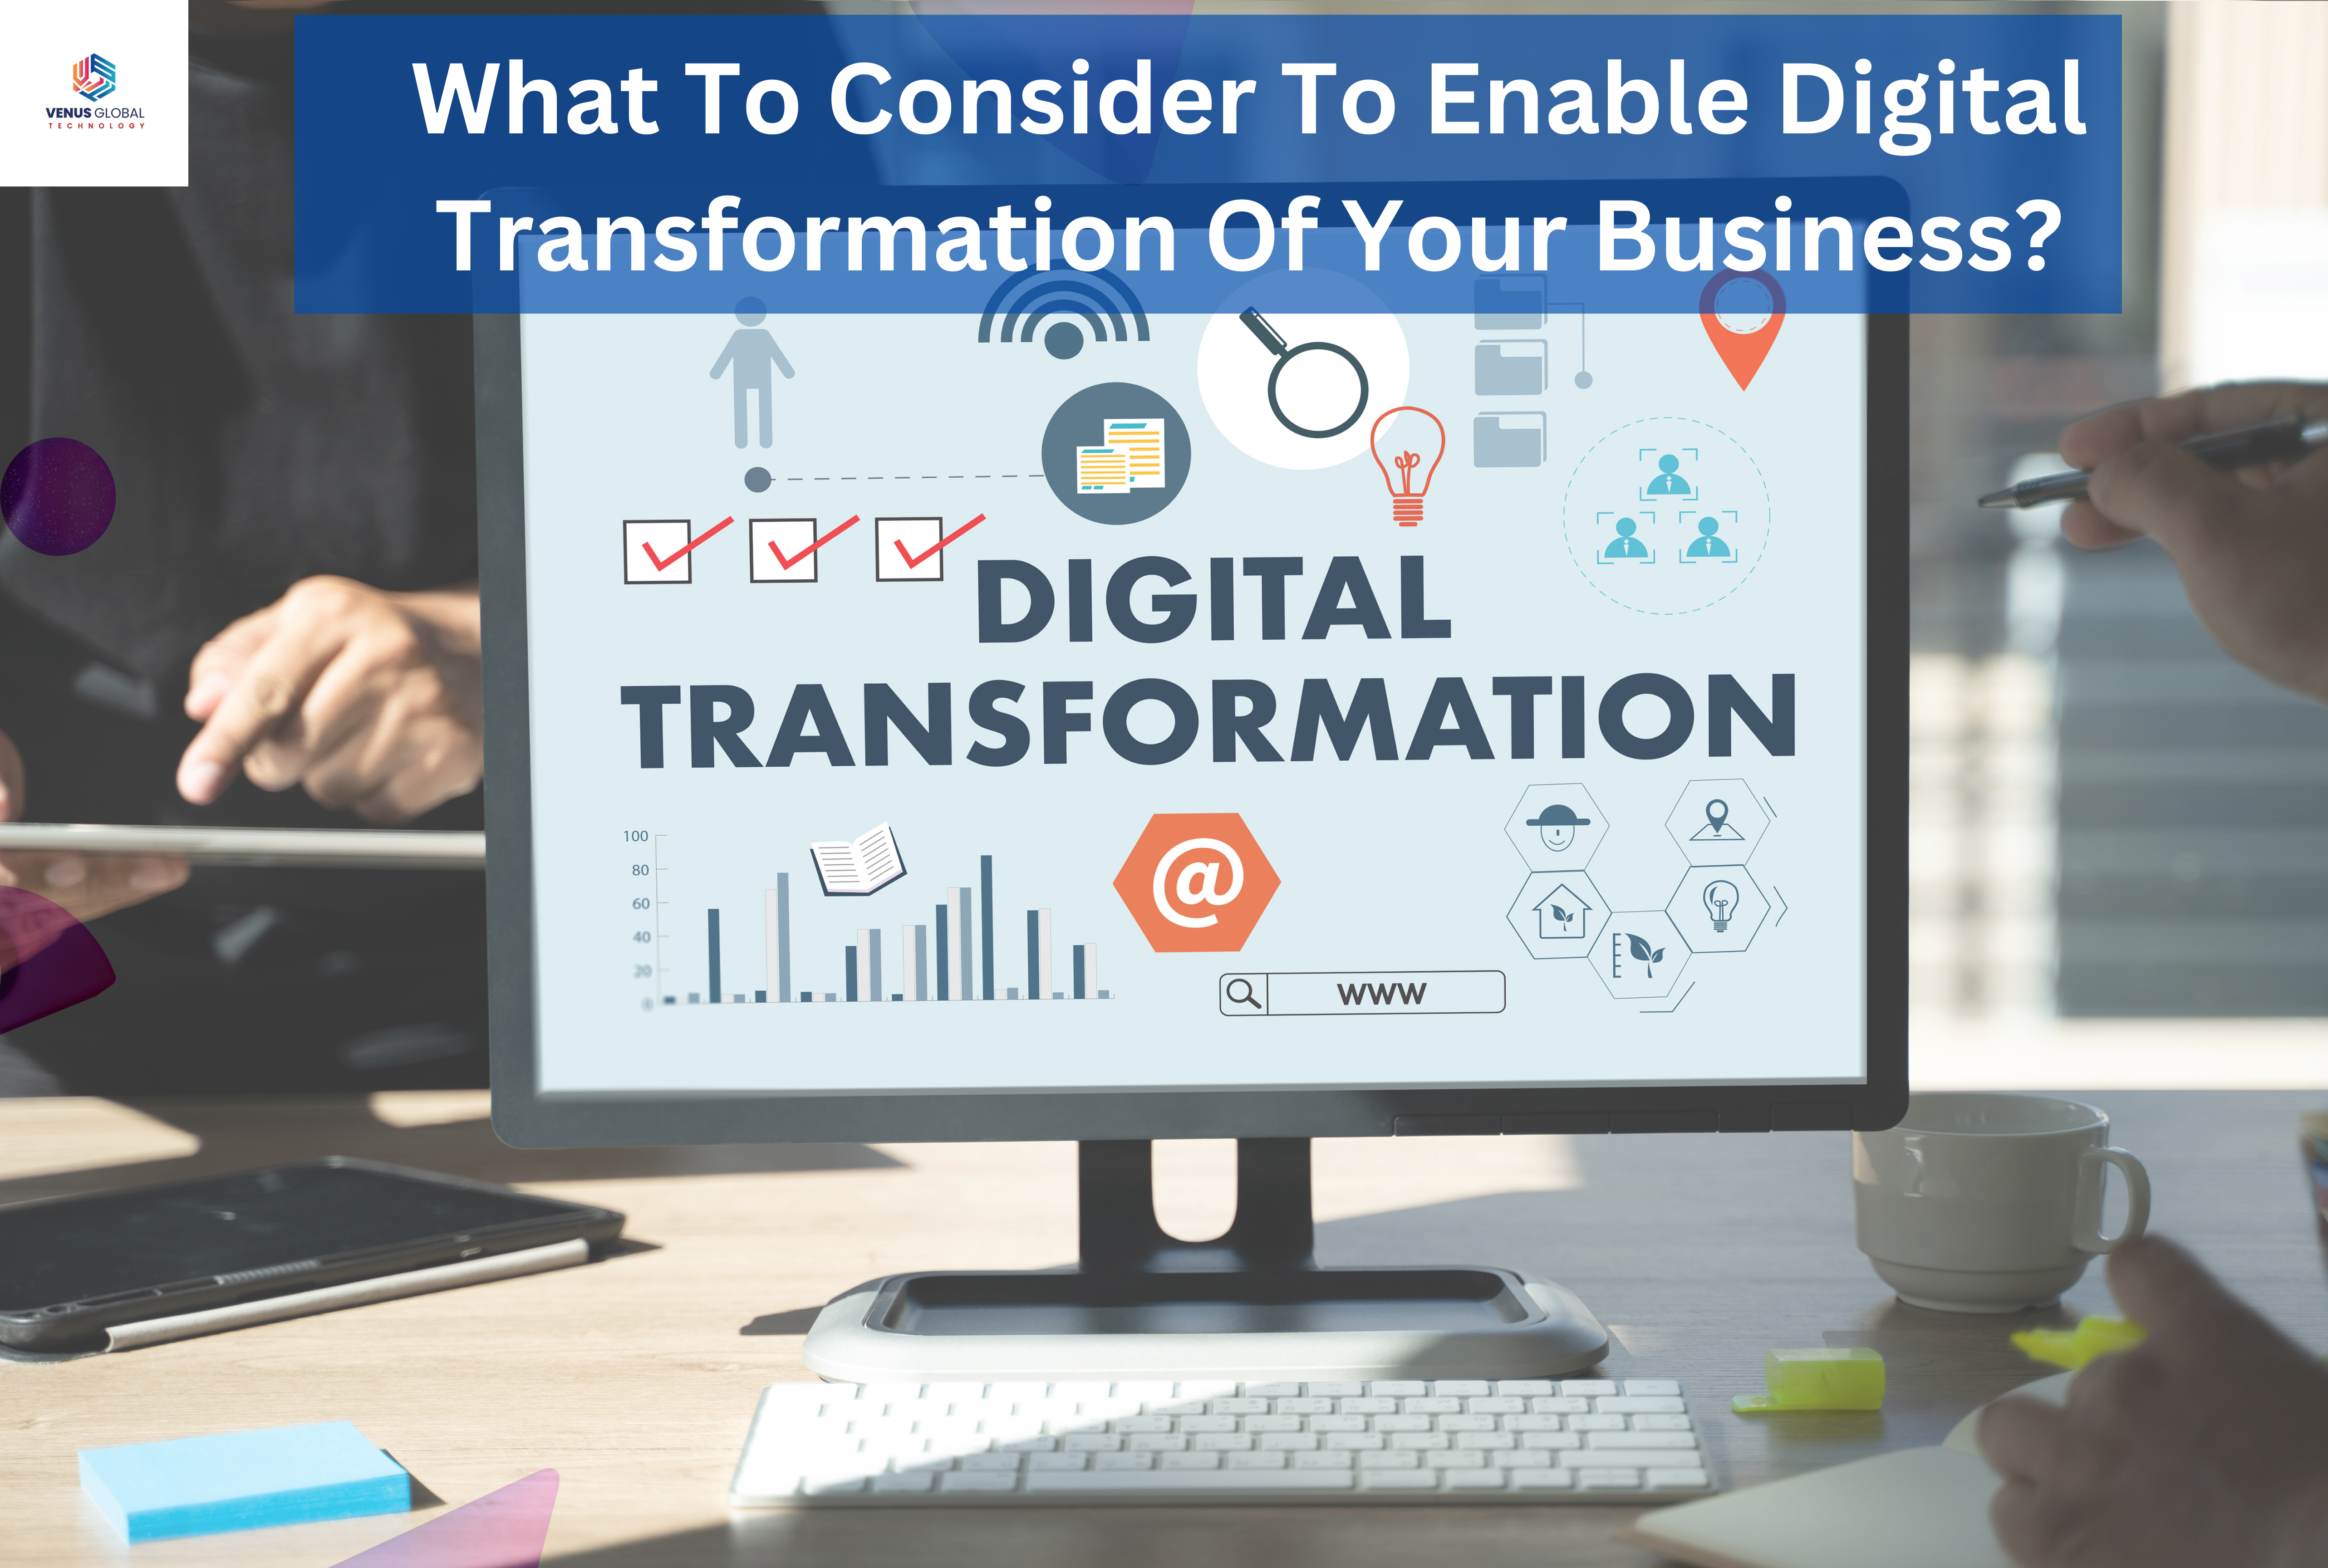 What To Consider To Enable Digital Transformation Of Your Business?